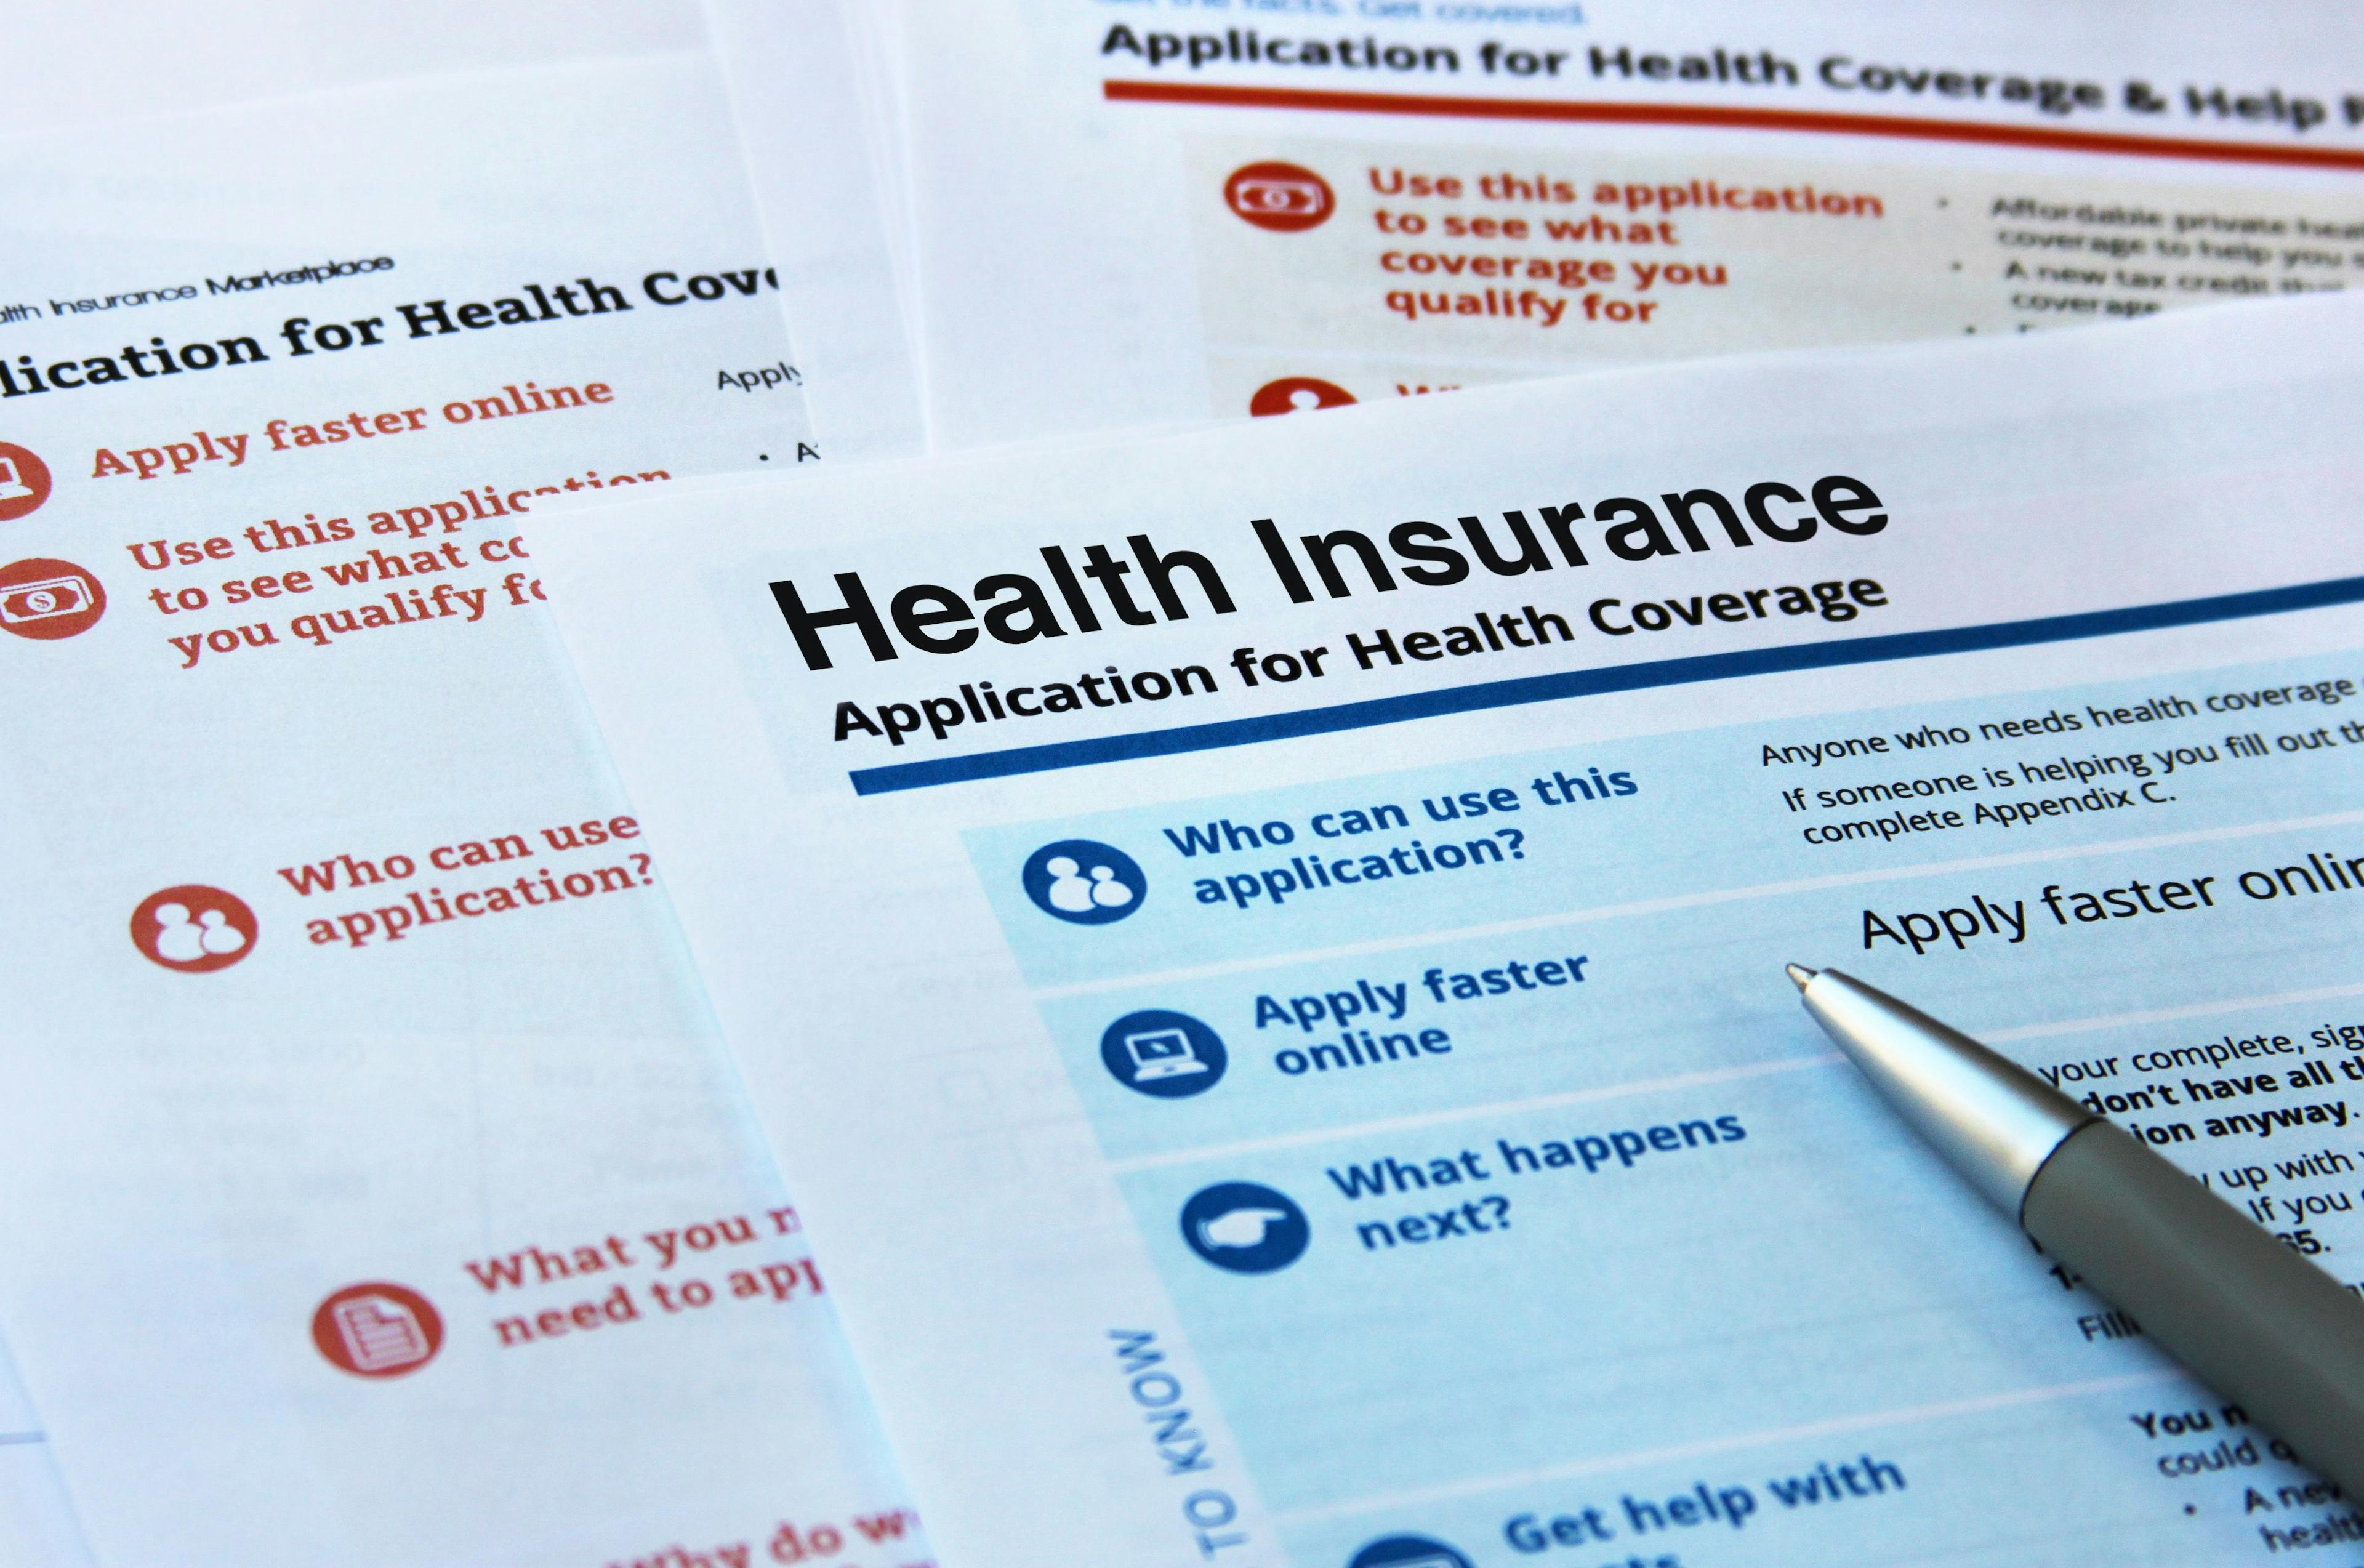 picture of health insurance application forms ©Annap-stock.adobe.com